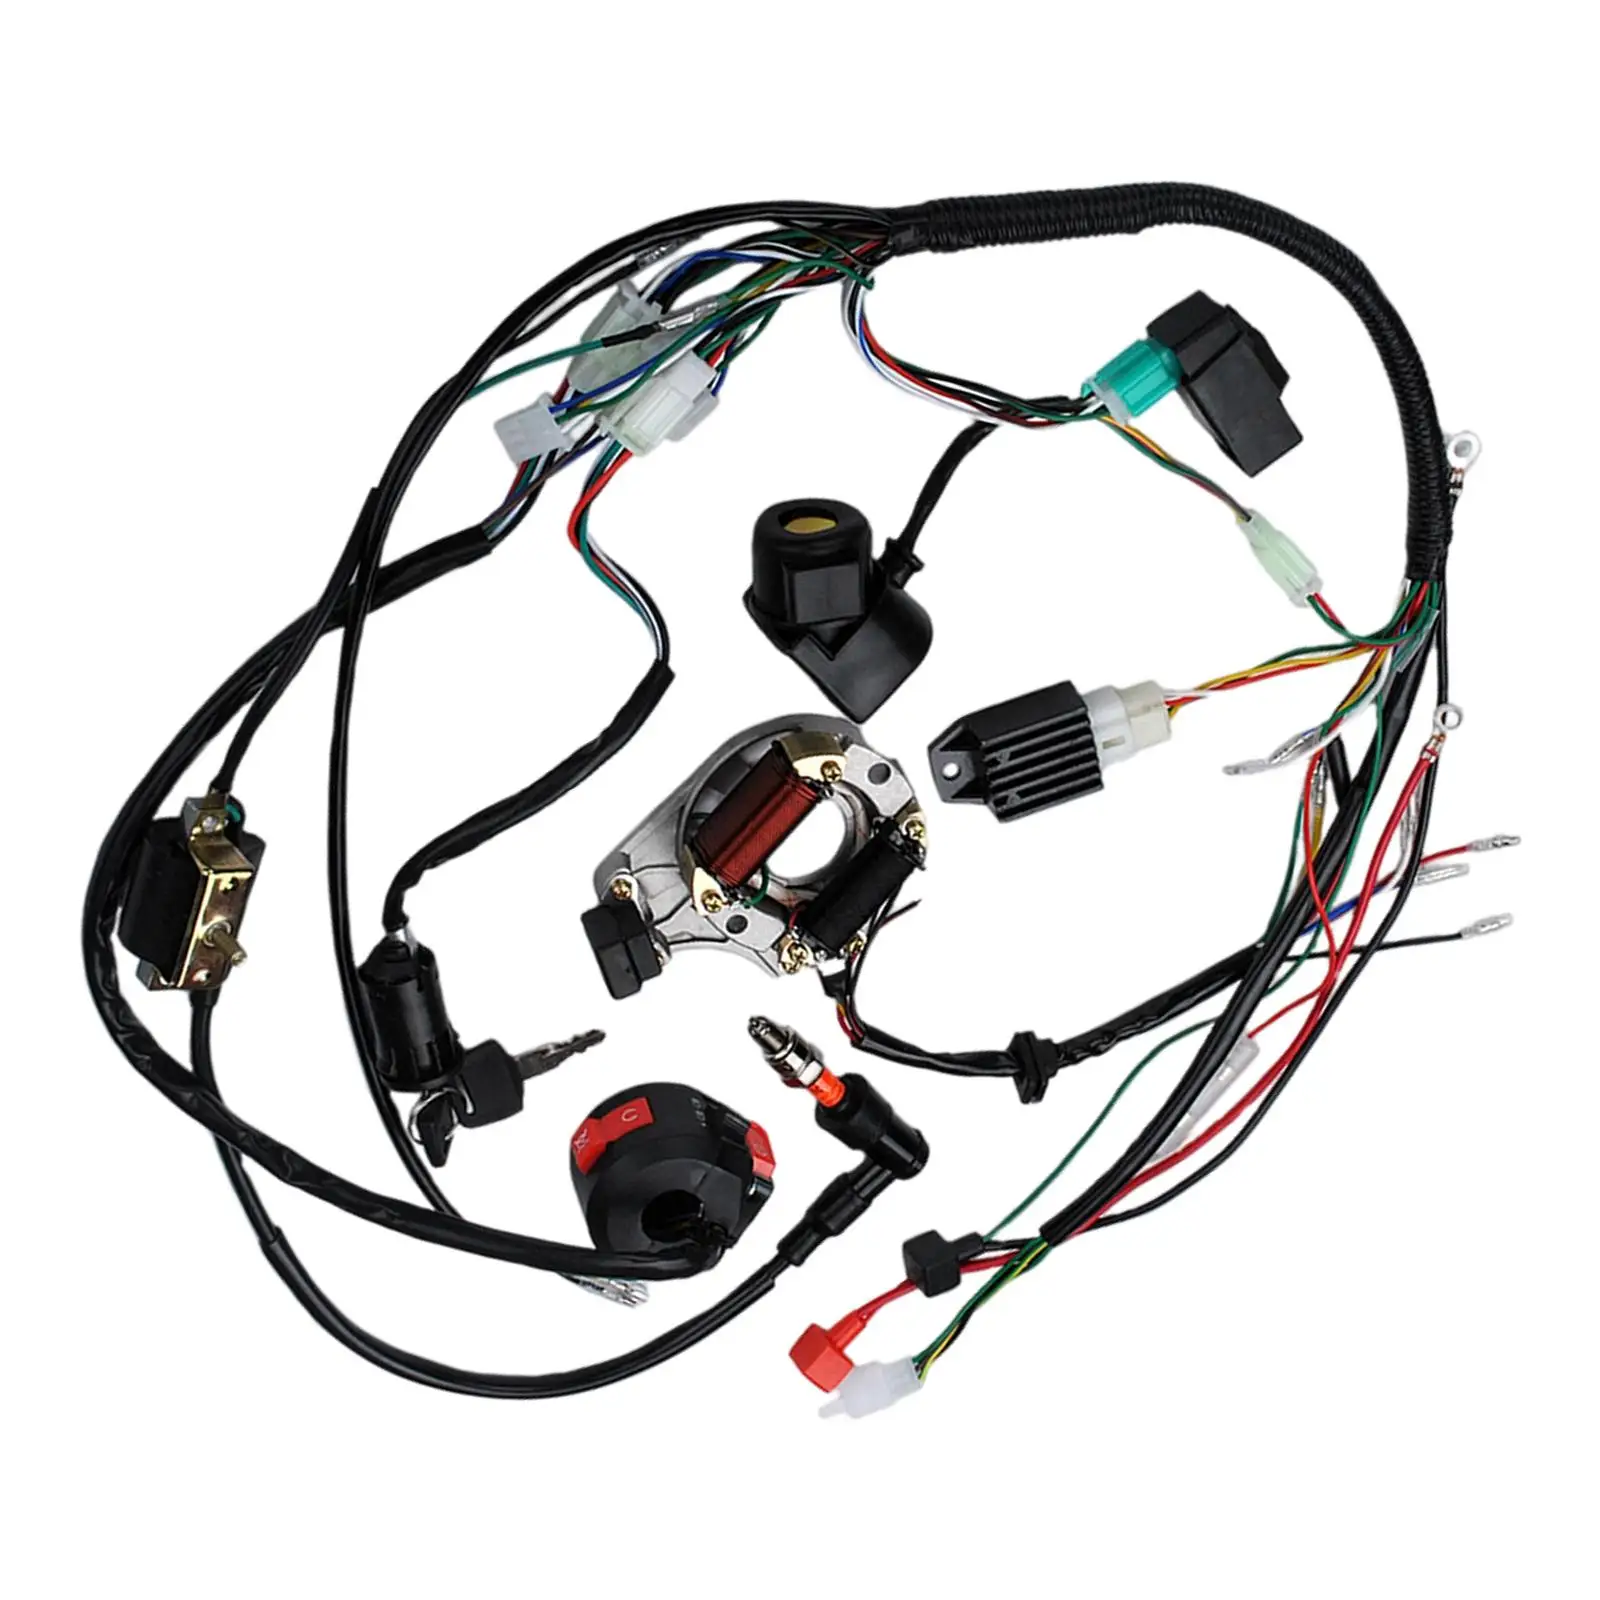 1Set Full Complete Electrics Wiring Harness Cdi Spark Plug Solenoid Relay Fit for Dirt Bike ATV Buggy 50cc 70cc 110cc 125cc